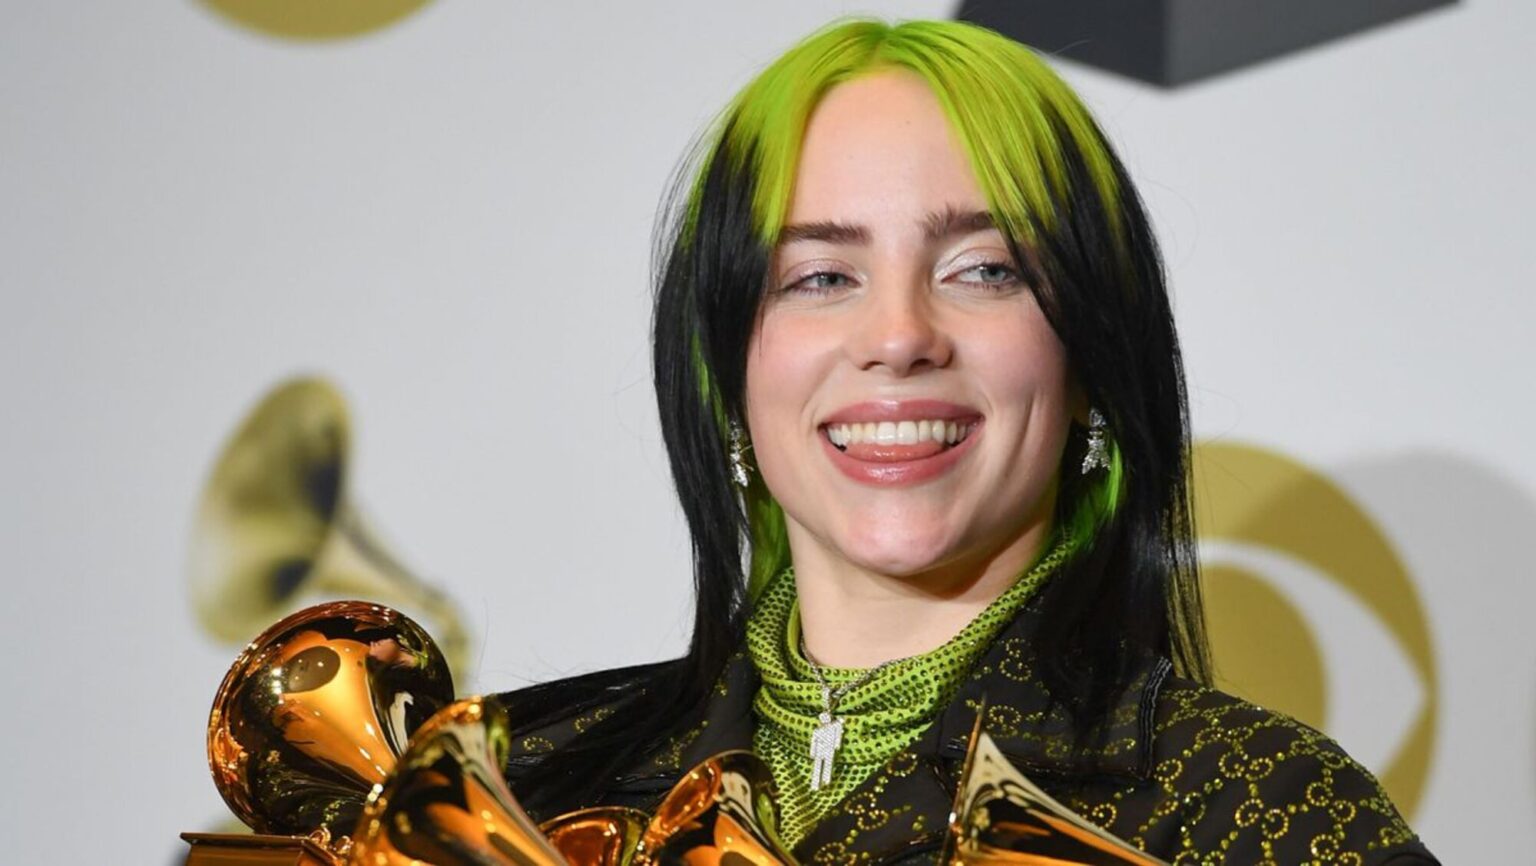 Billie Eilish is one of the world's biggest pop stars, so what does her net worth look like? Find out how much this record-breaking musician earns here.